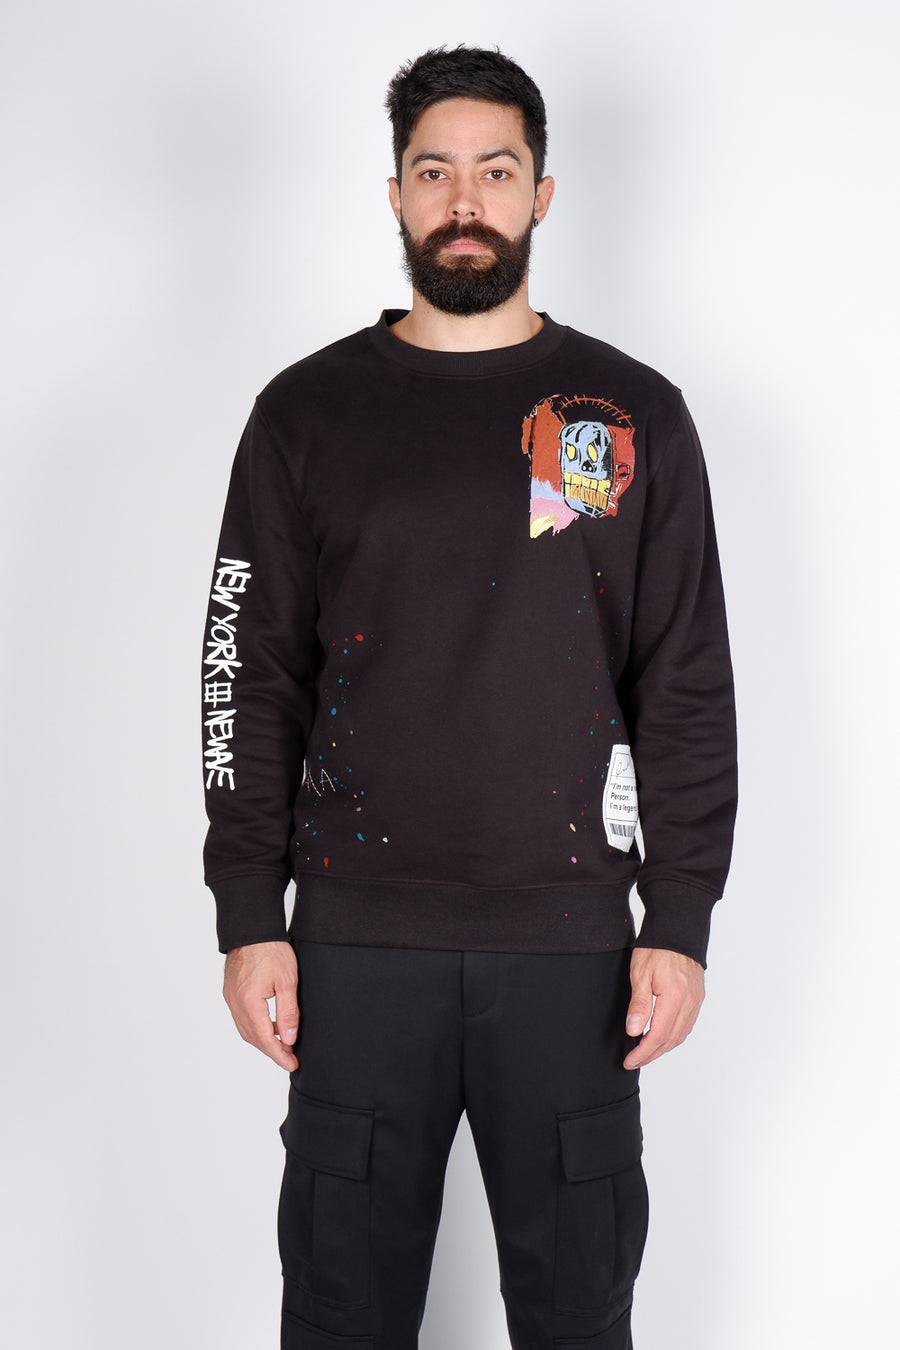 Buy the ABE Legend Sweatshirt in Black at Intro. Spend £50 for free UK delivery. Official stockists. We ship worldwide.